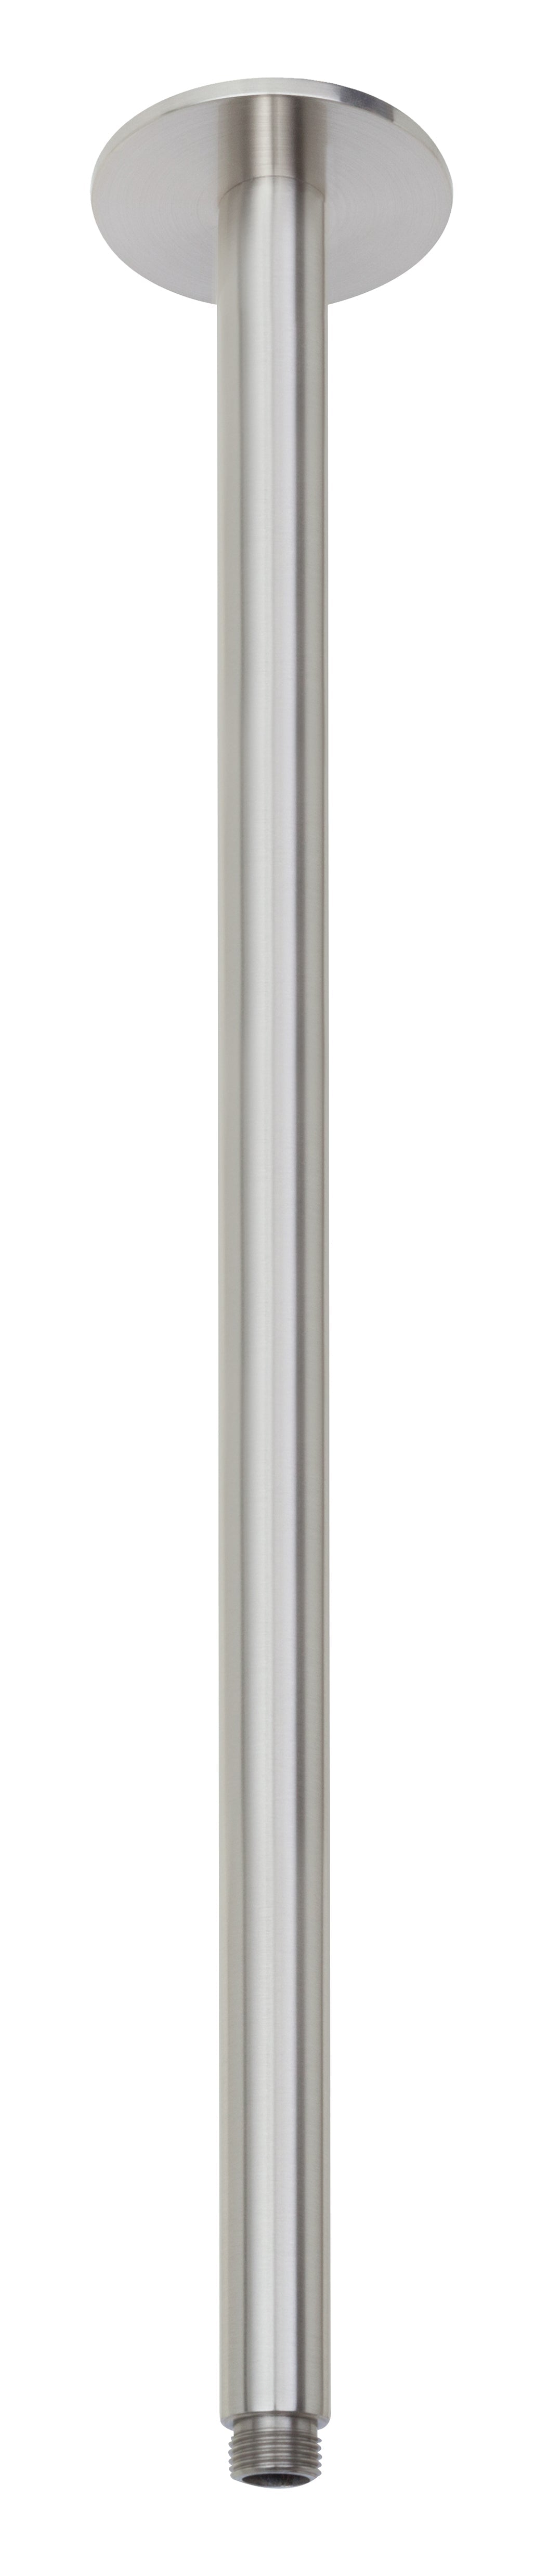 Vivid Ceiling Arm Only 450mm (Brushed Nickel)